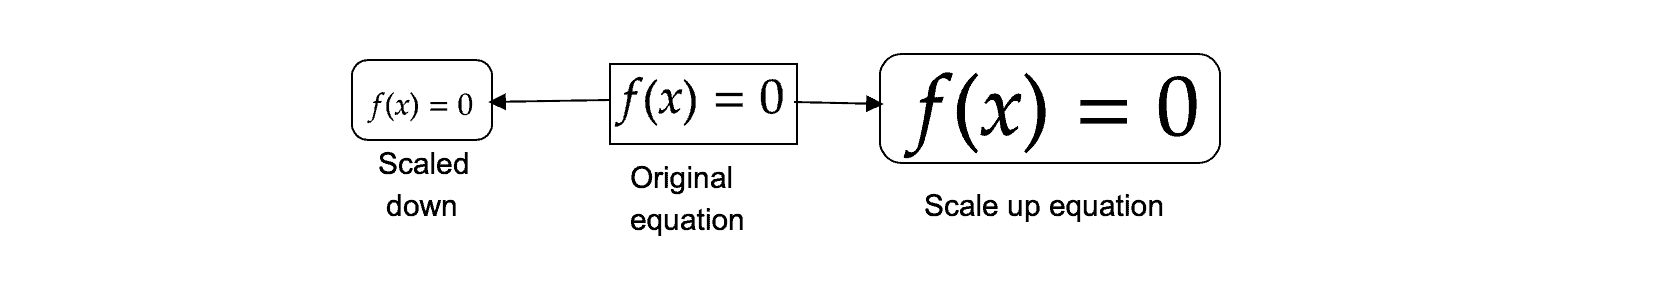 Scaled equations